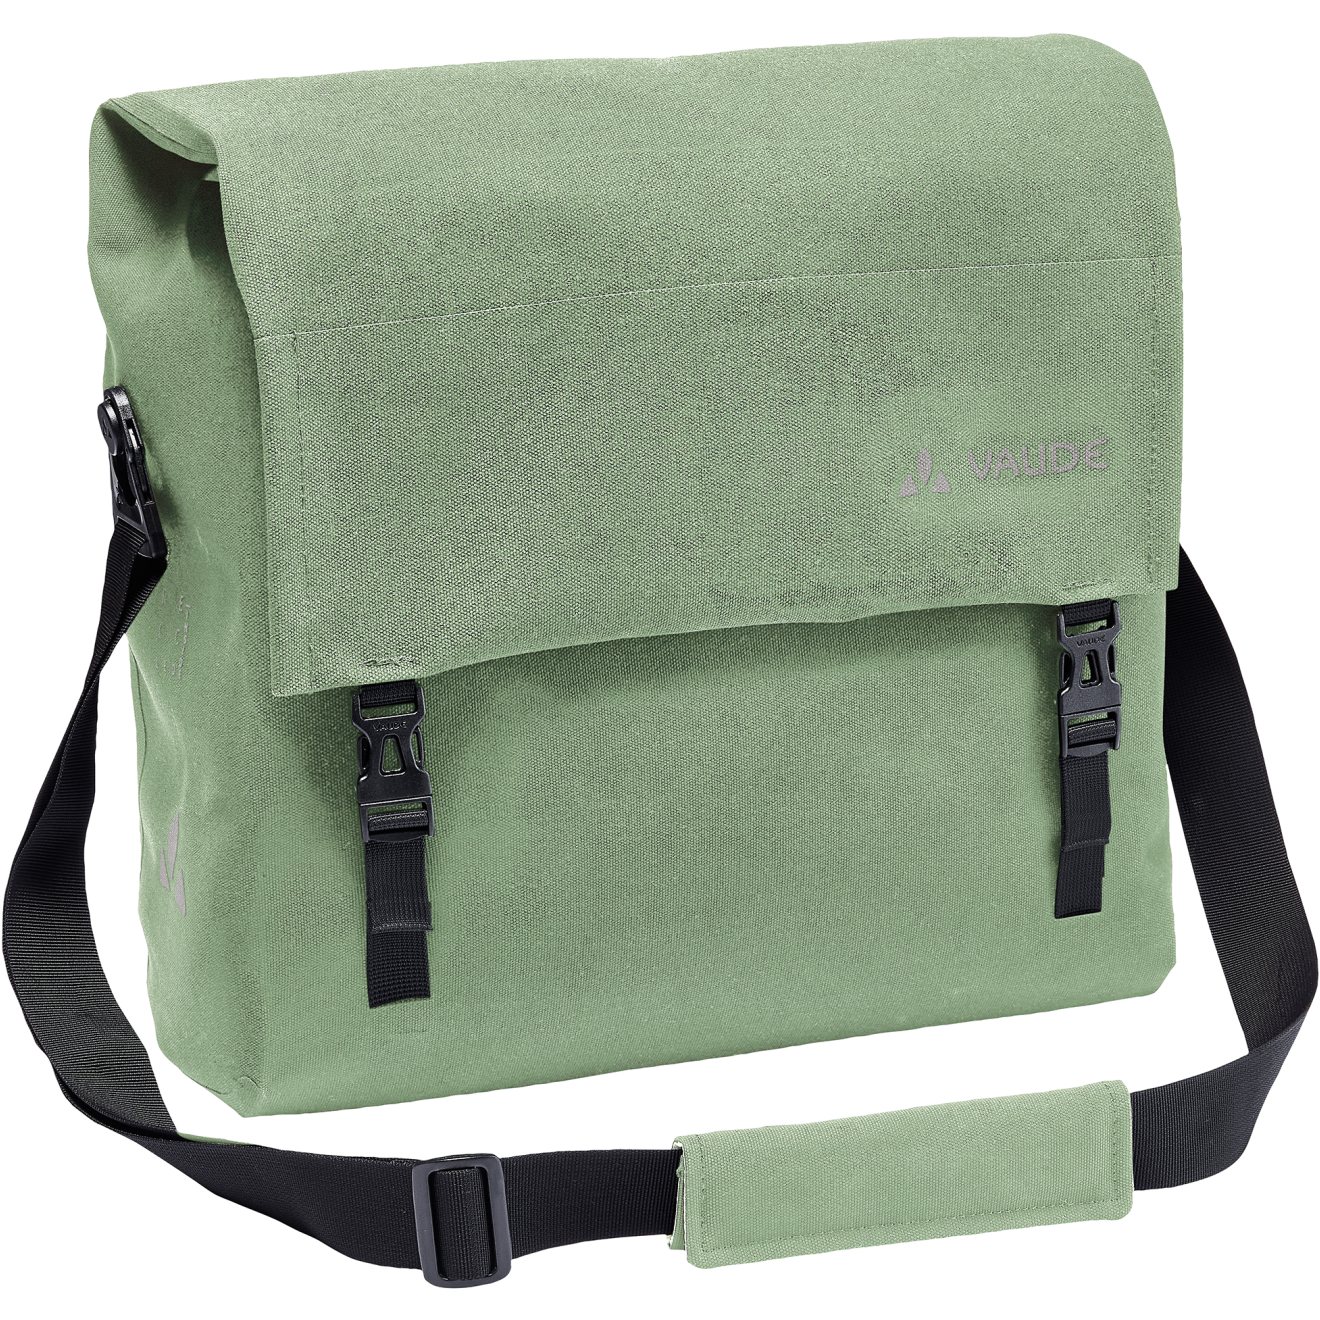 Picture of Vaude Augsburg IV M Bike Bag 14L - willow green